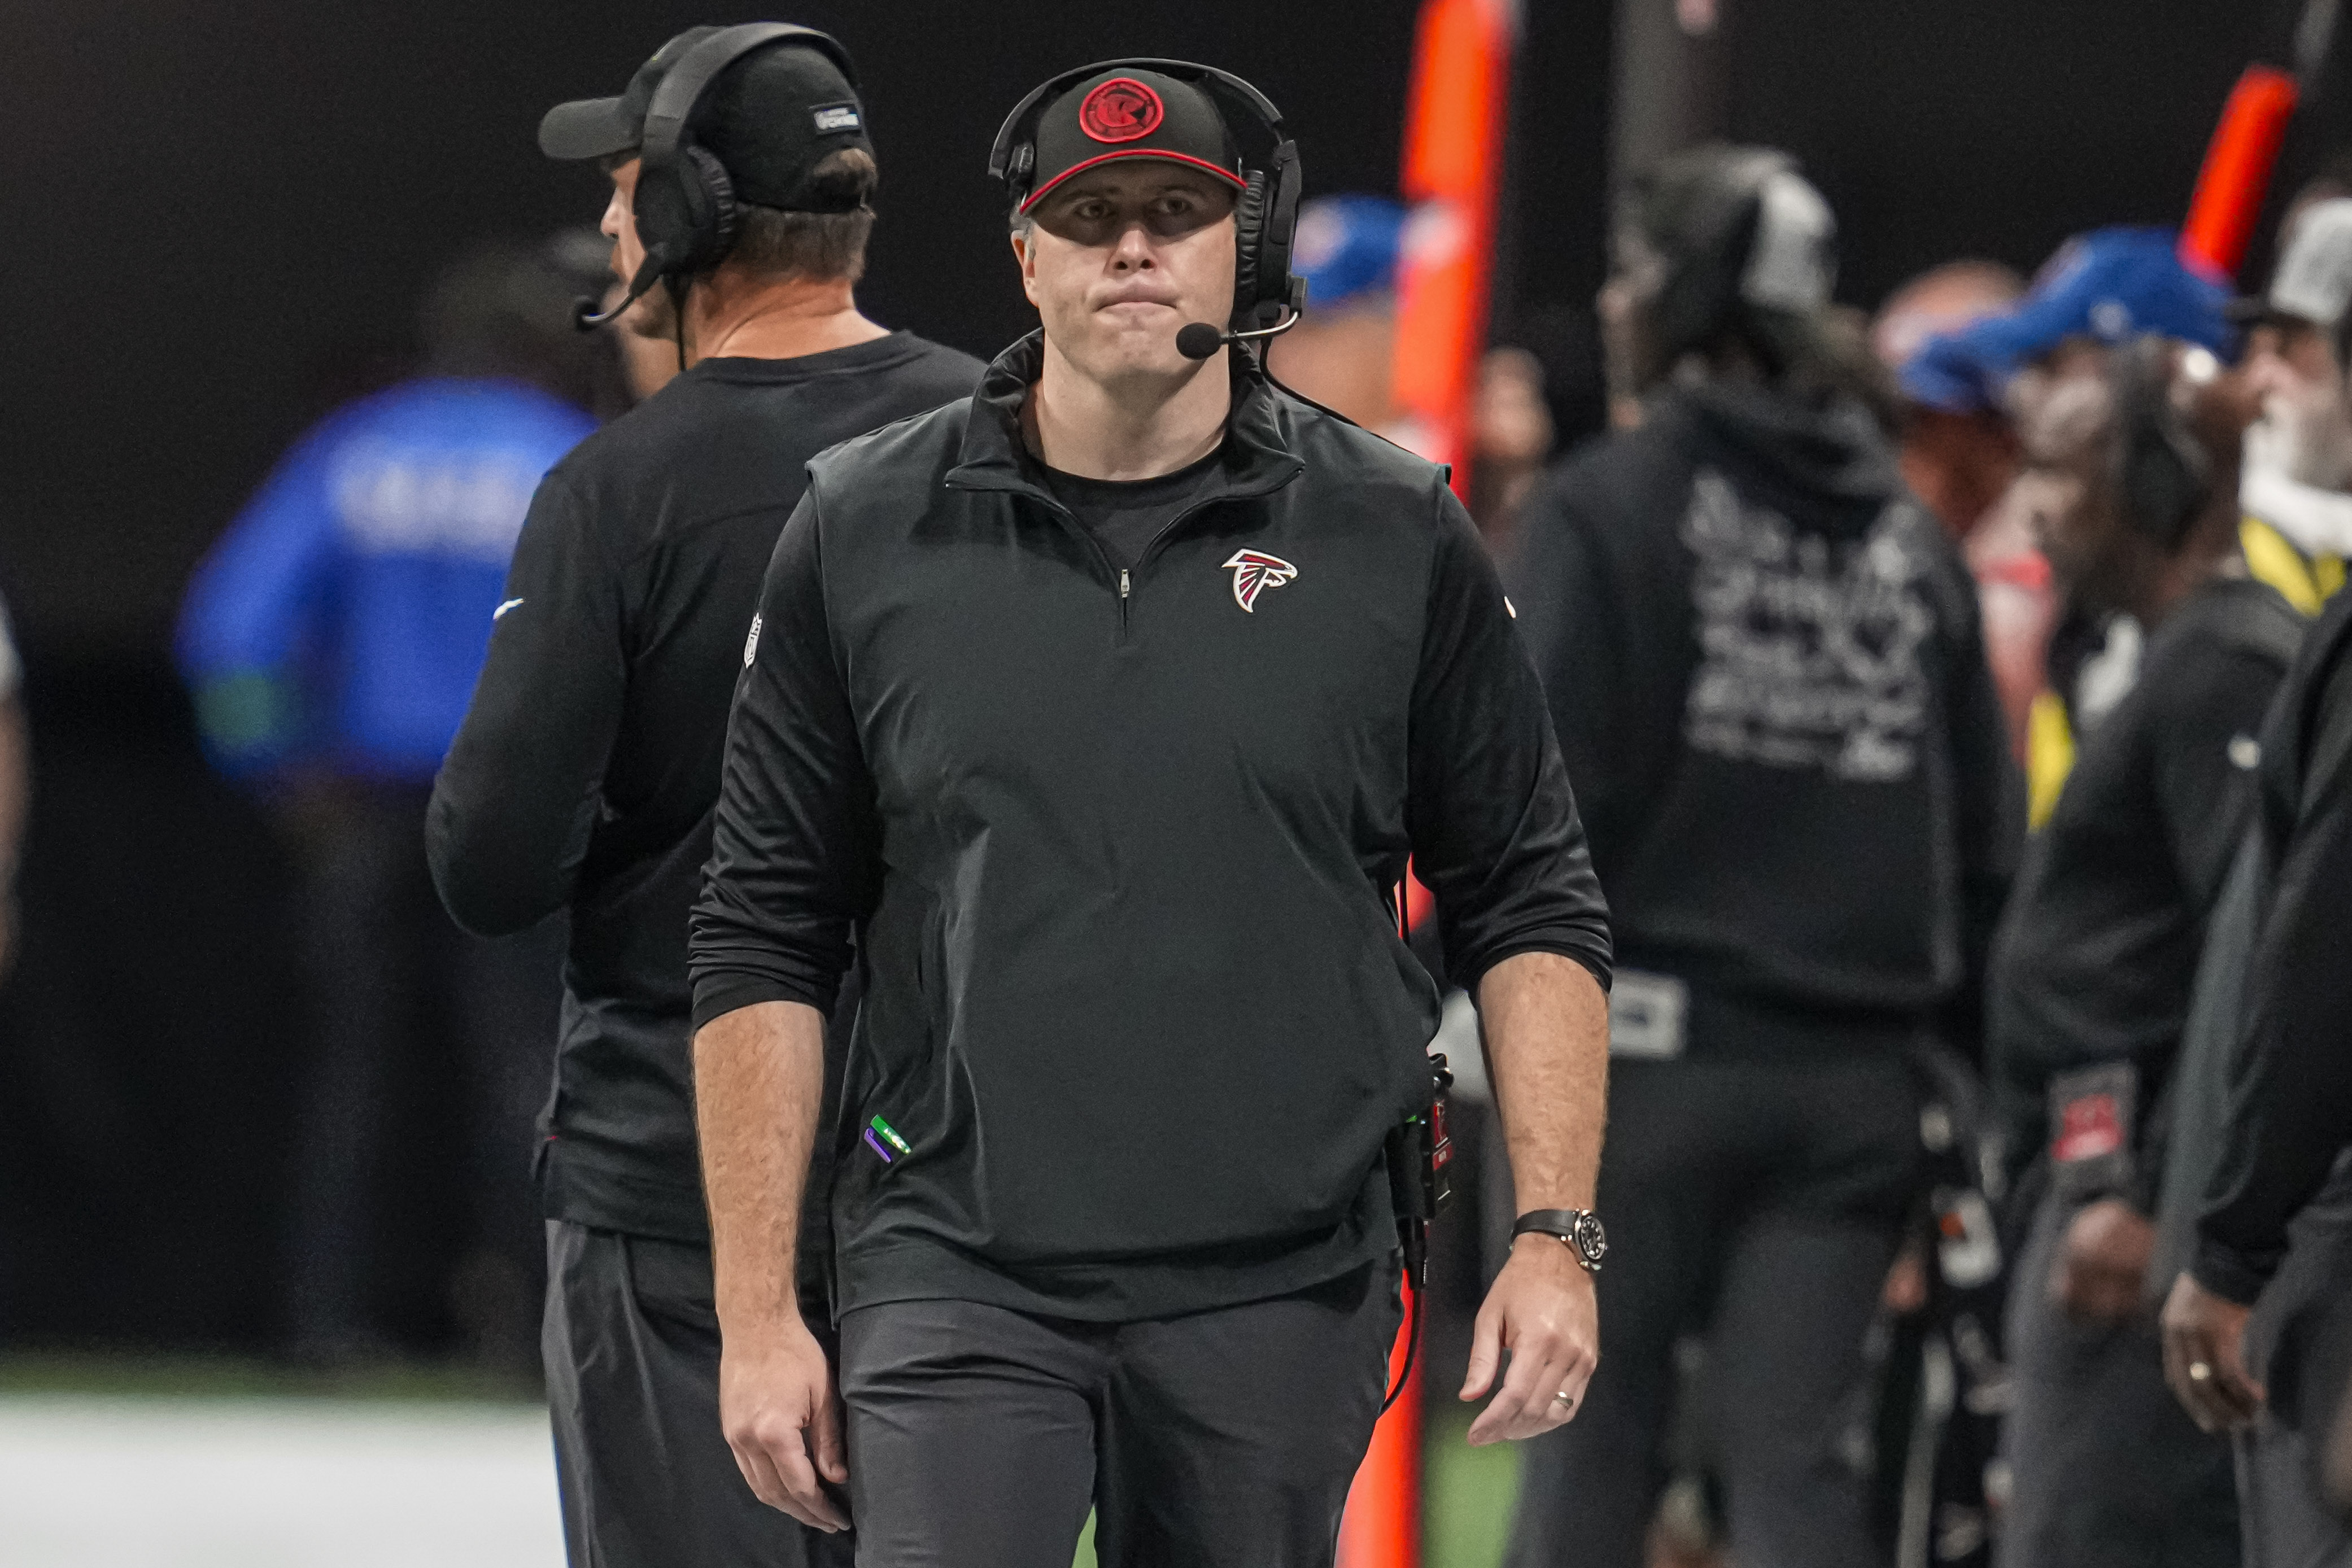 Atlanta Falcons head coach Arthur Smith on the sideline during the game against the Indianapolis Colts during the second half at Mercedes-Benz Stadium.